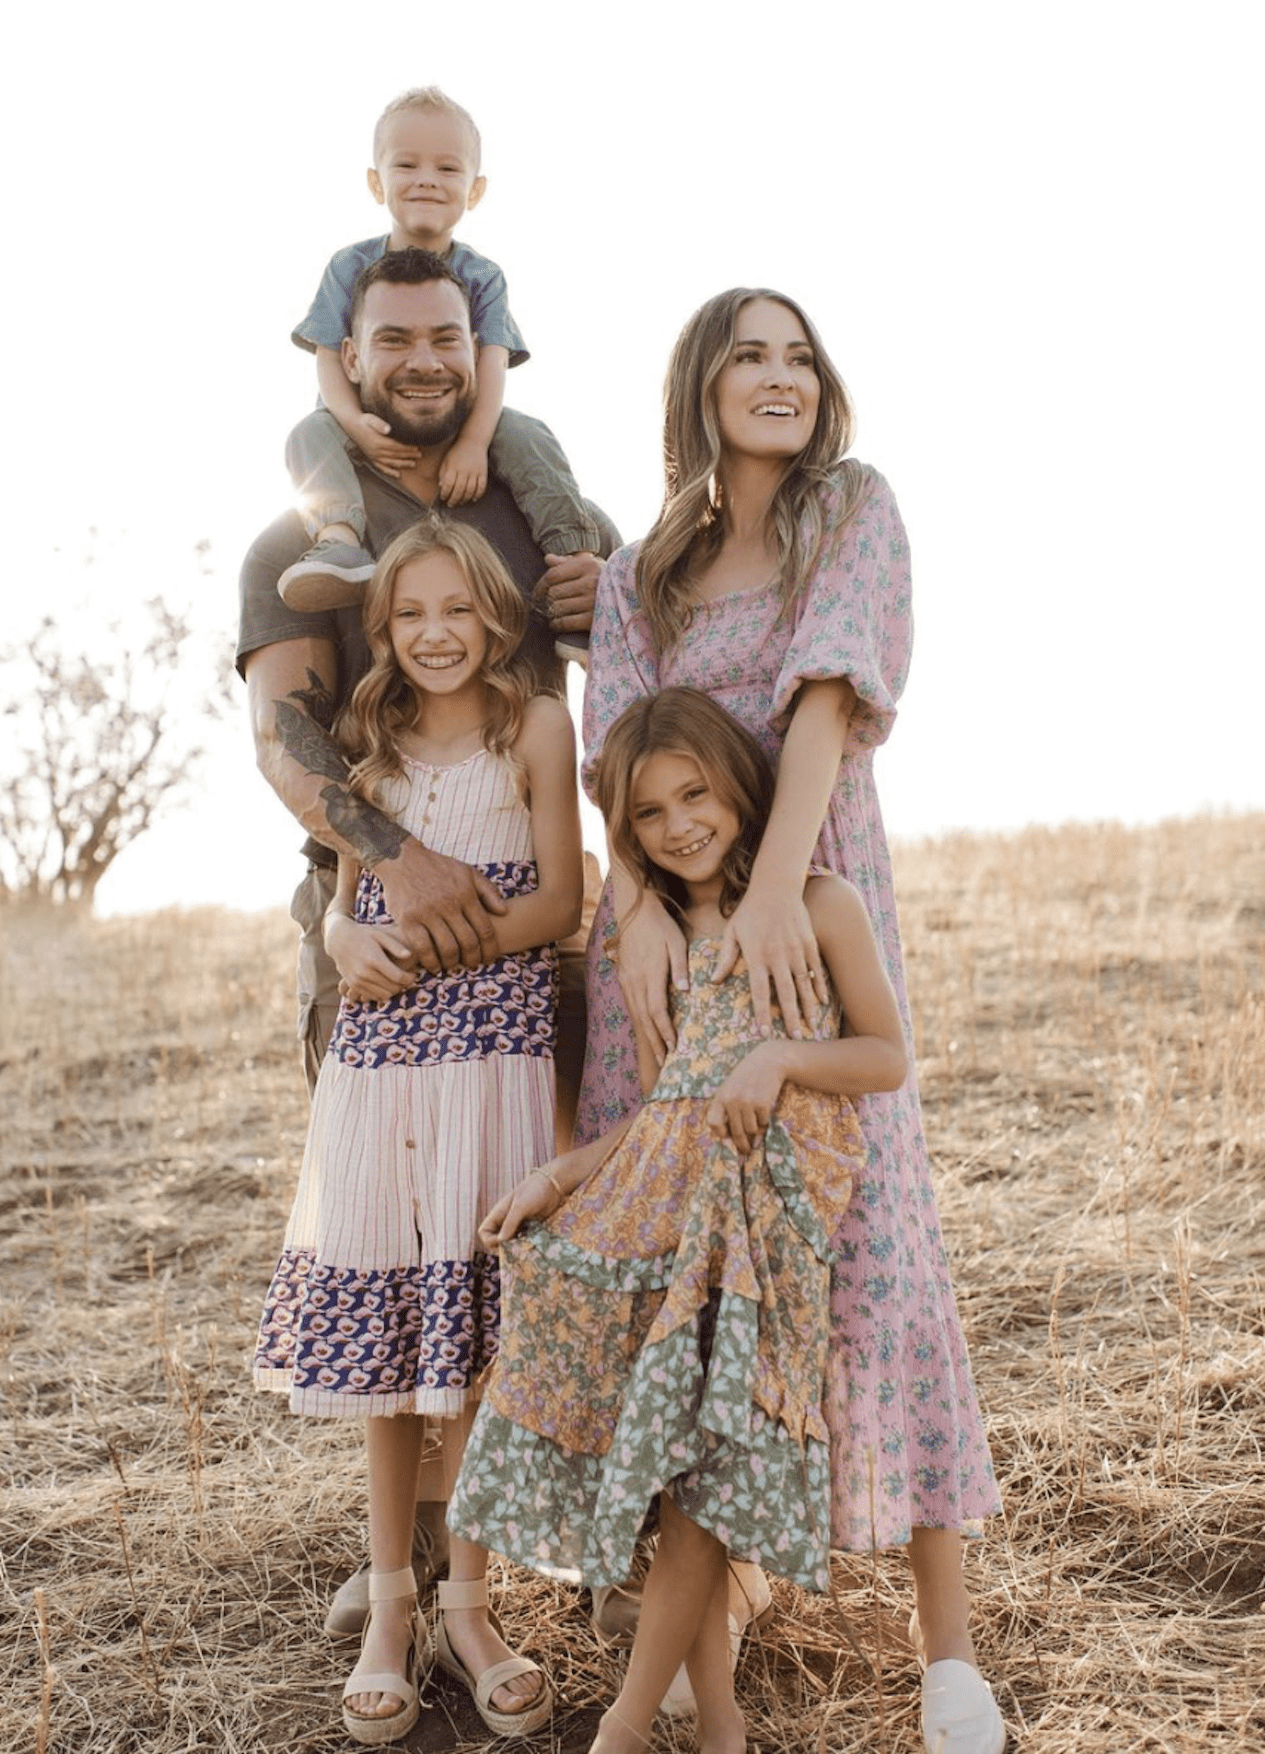 Summer Family Photo Outfits: 24+ Looks To Inspire You! - Luv68